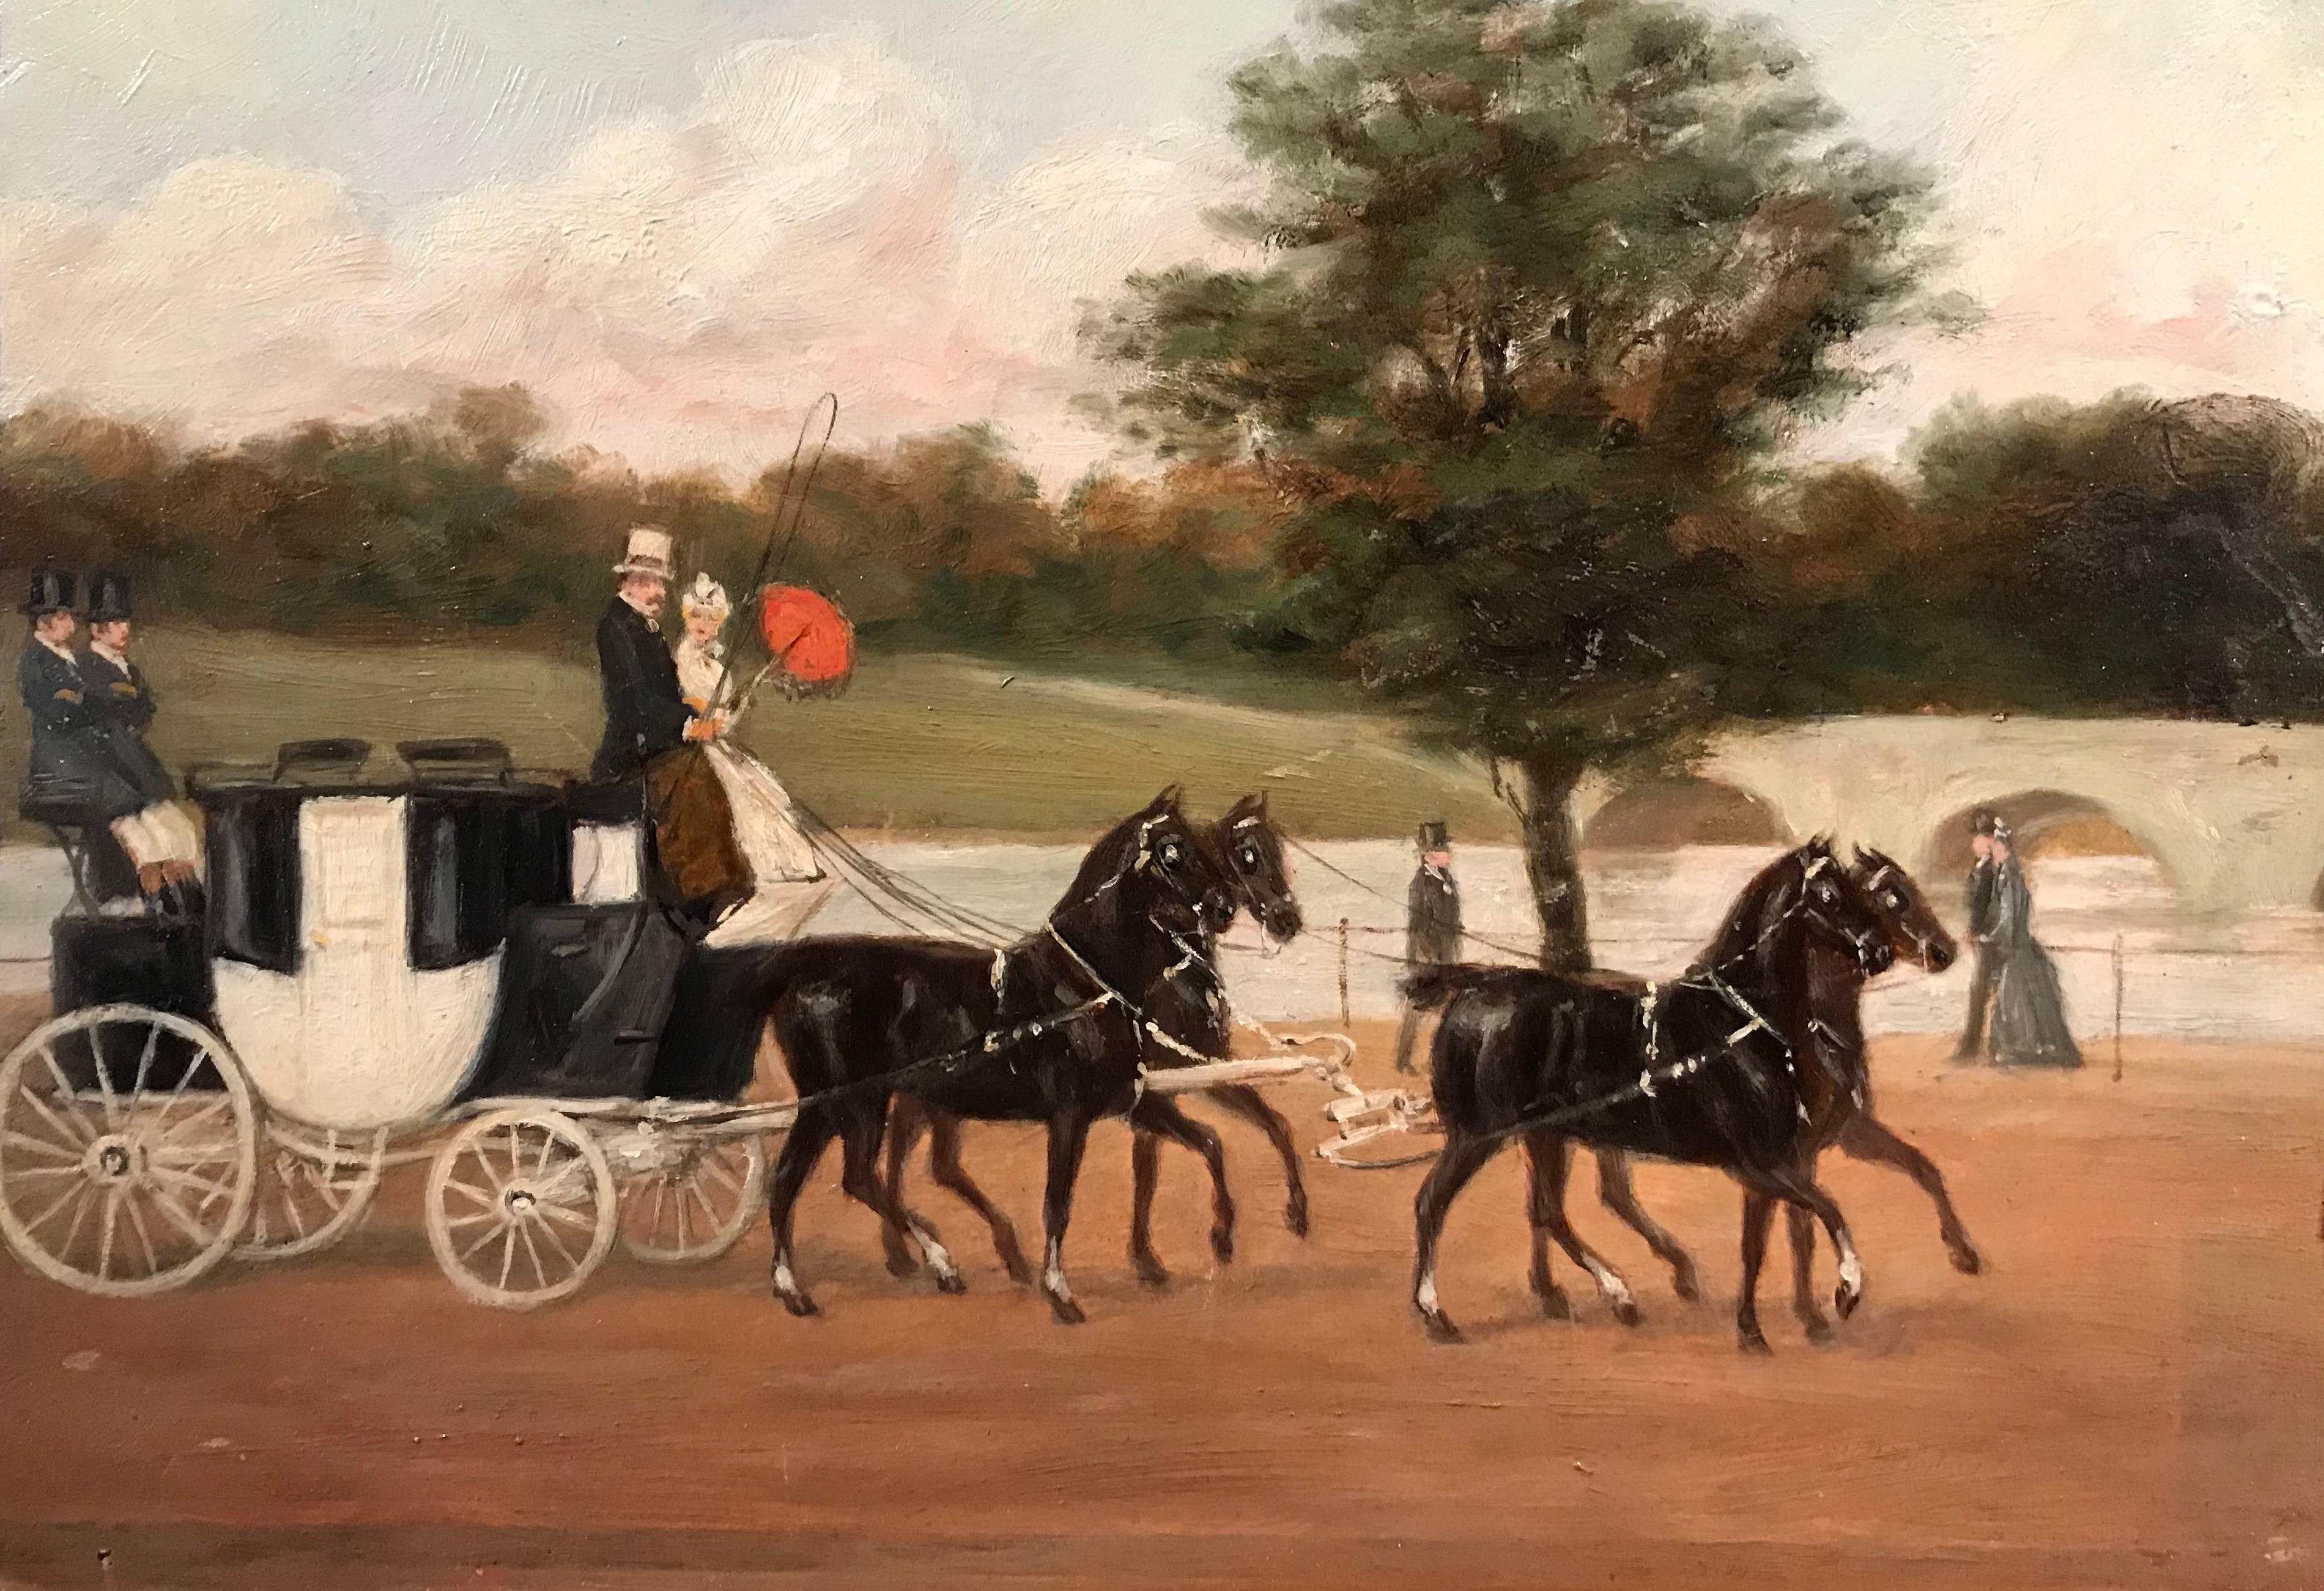 Very fine pair of original early Victorian oil paintings on canvas, depicting these lovely coaching scene insights into early 19th century English life. 

The first painting on the left depicts an elegant carriage, being led by four very smart